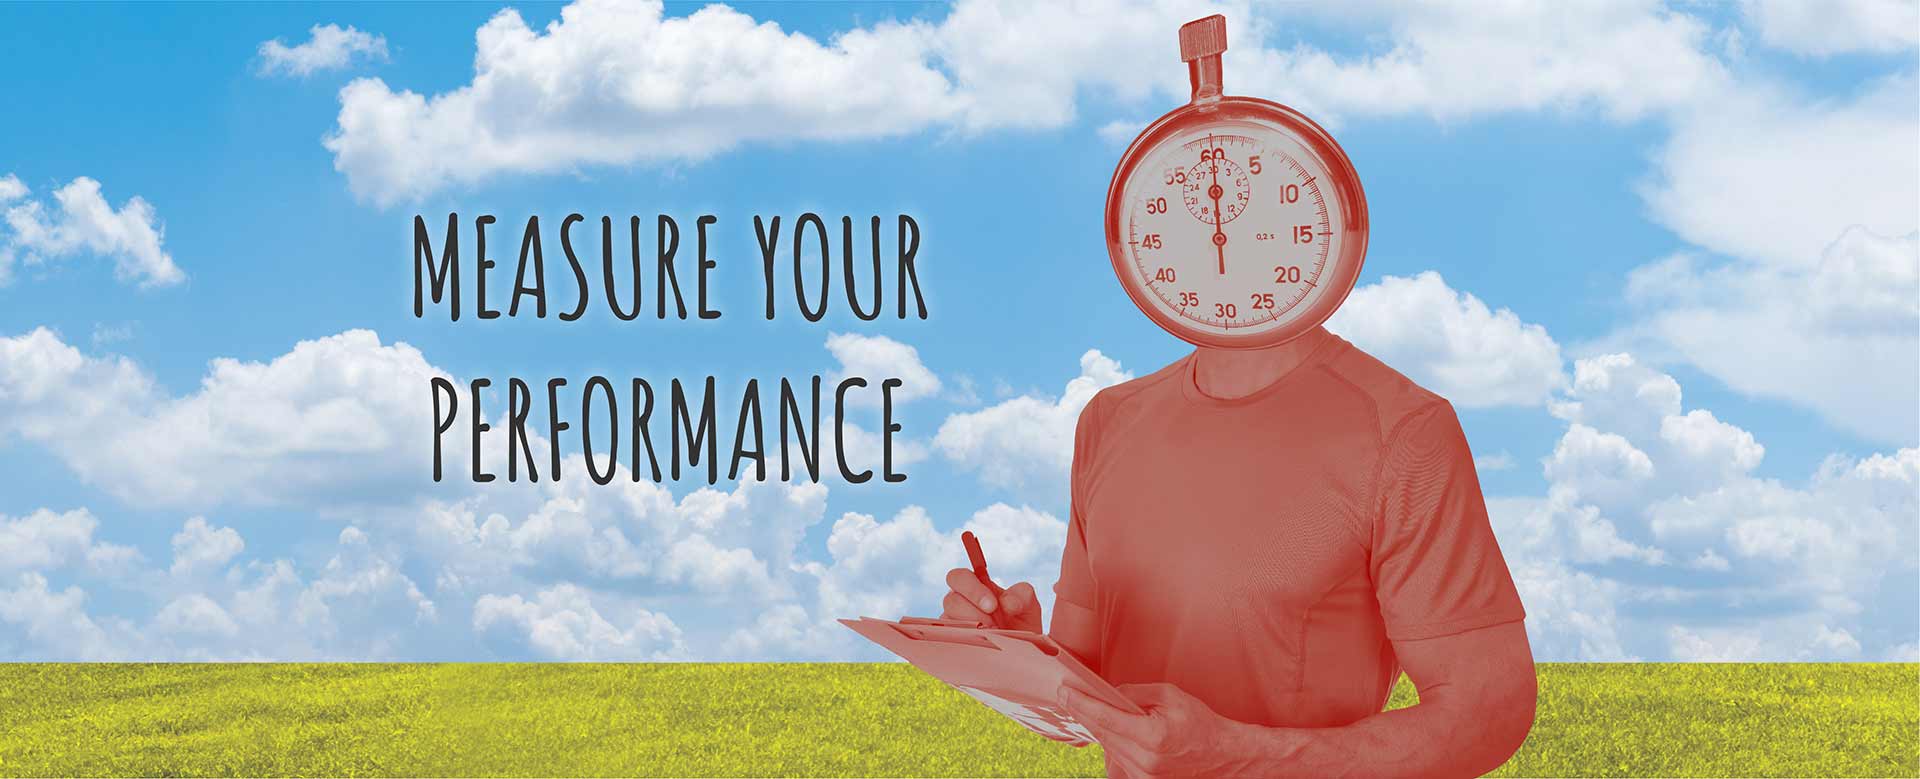 Measure Your Performance